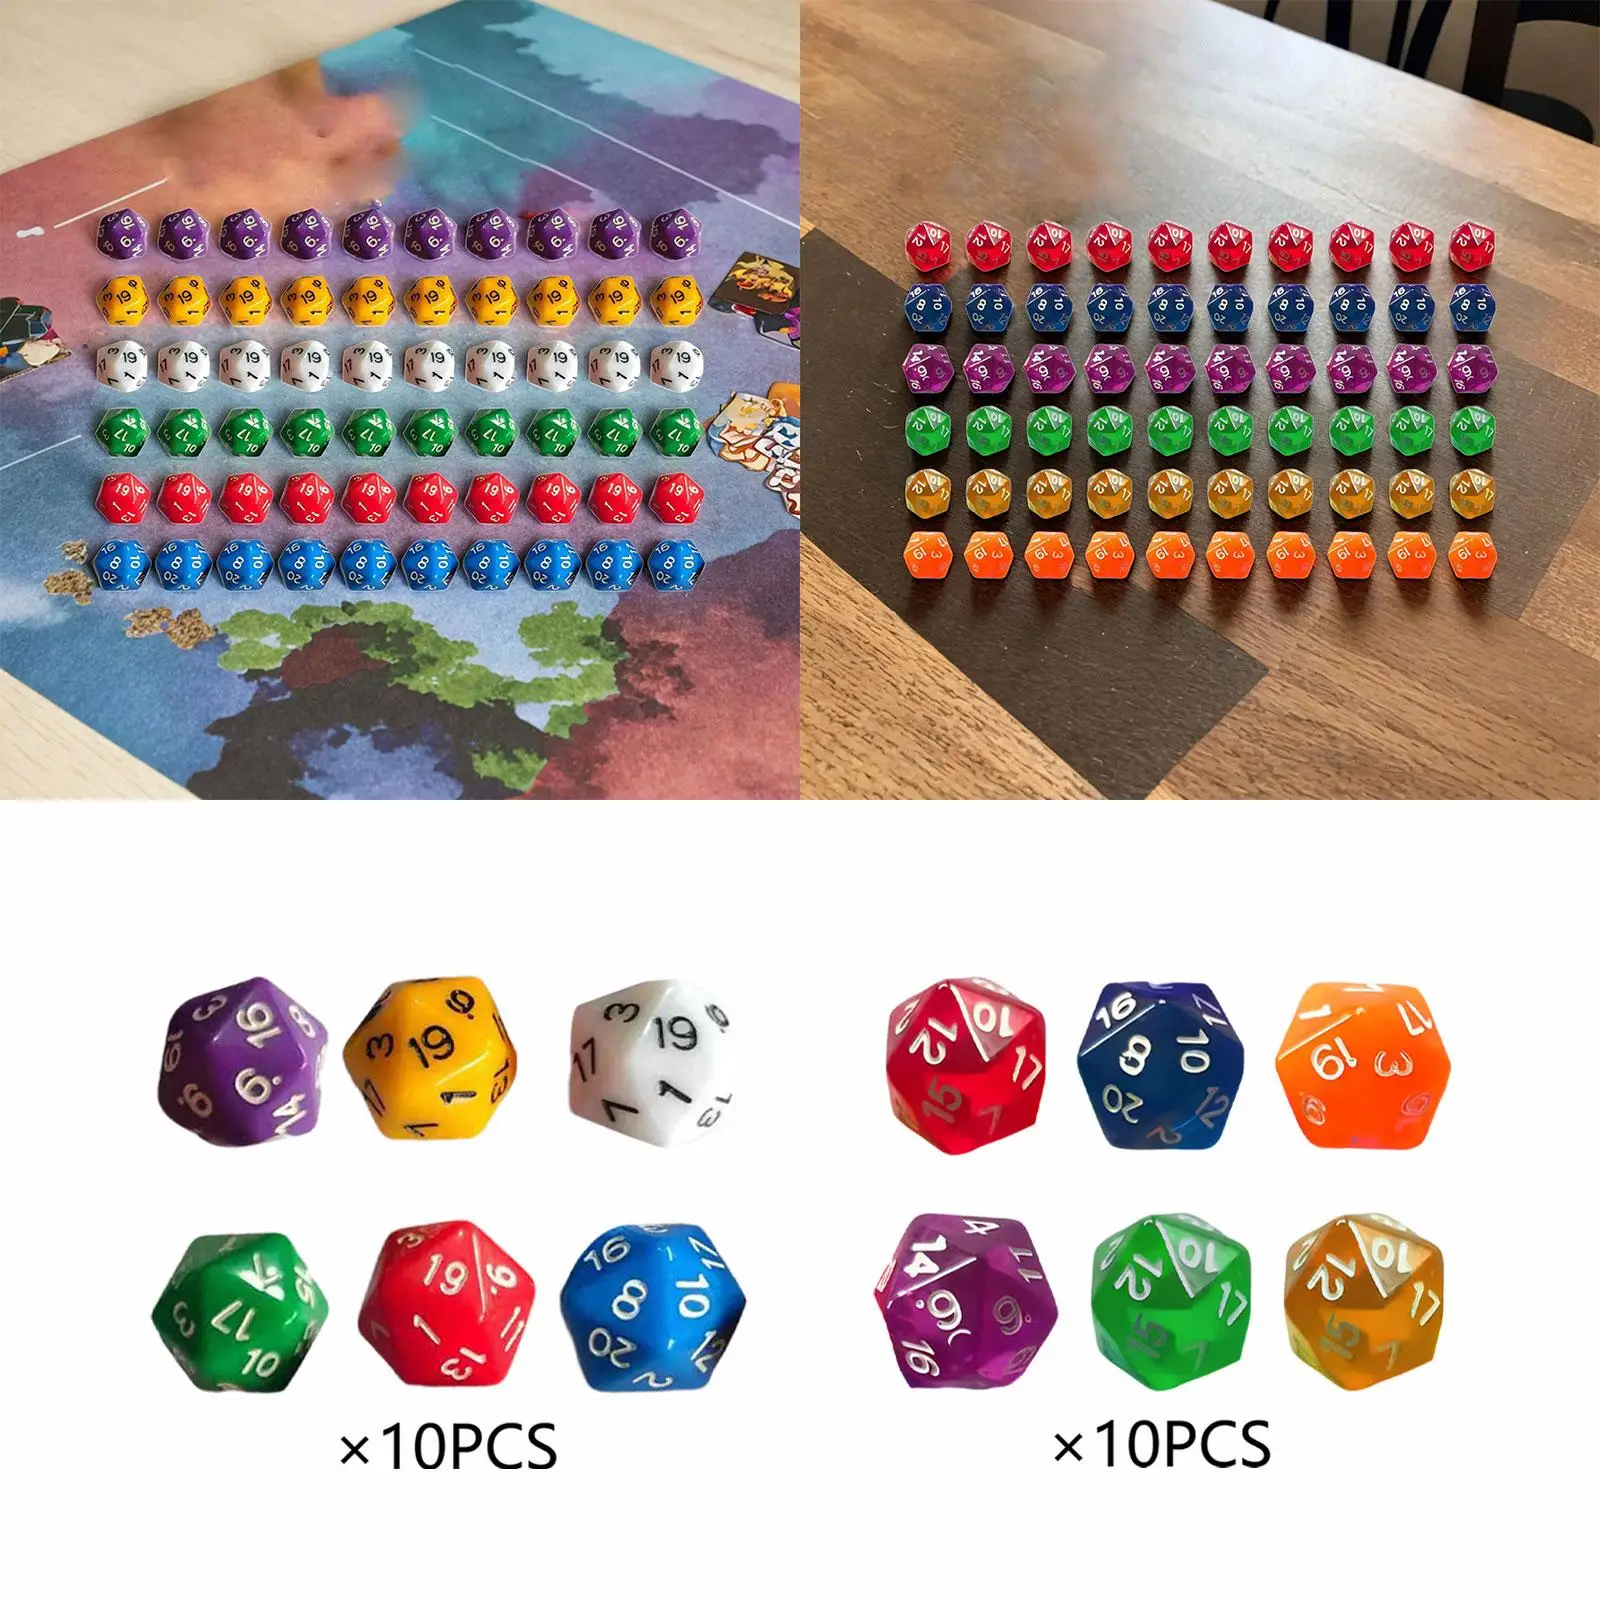 60Pcs 20 Sided Dice Party Supplies Role Playing Game Dices 20mm Entertainment Toys Multi Sided Dices for Table Game Board Game